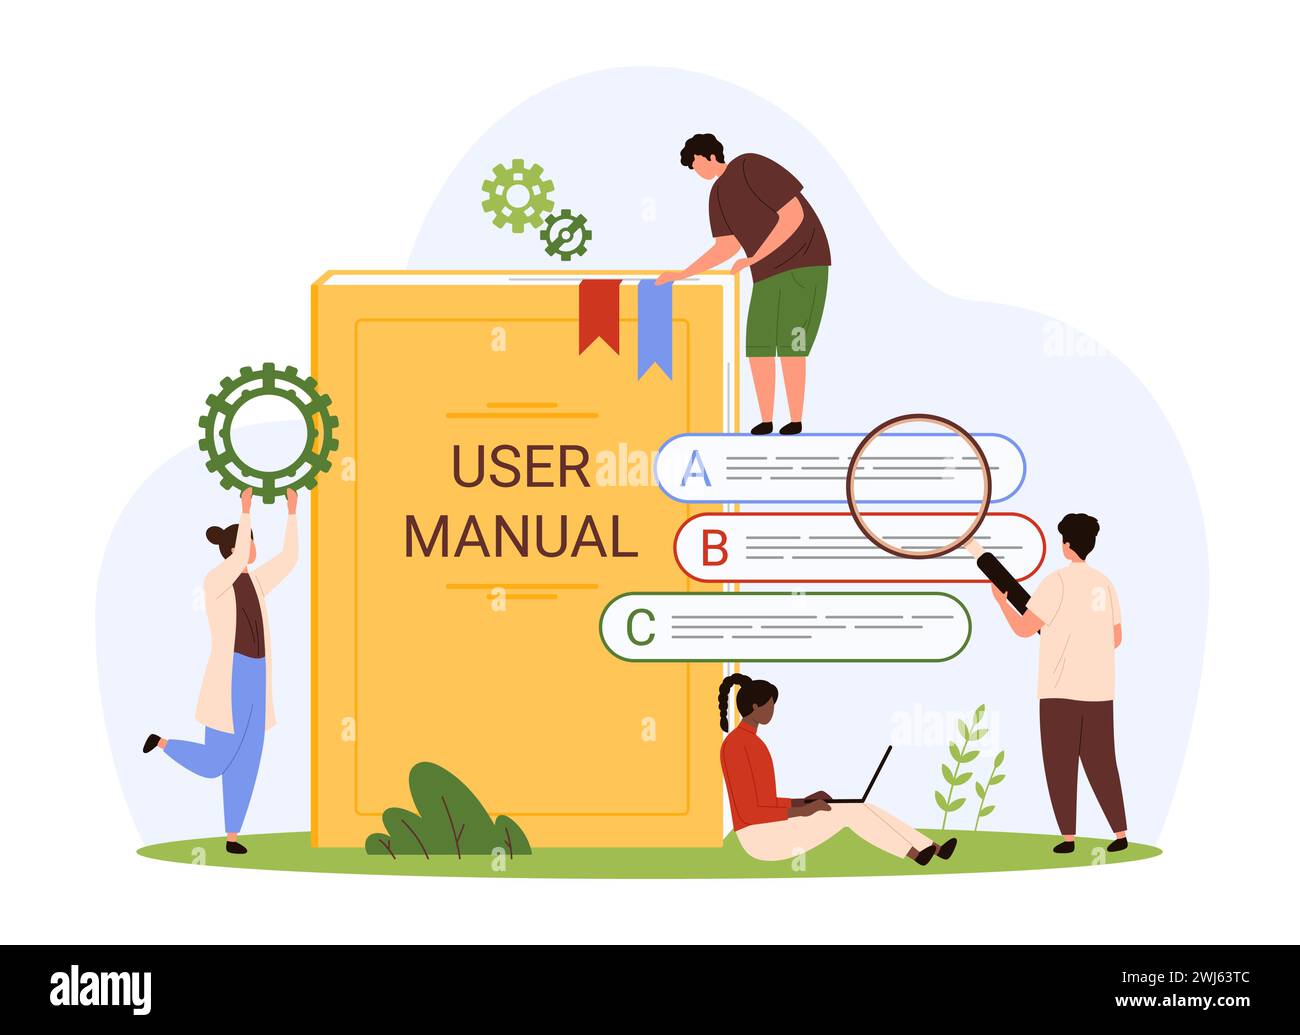 User manual, reference to guide, tutorial or library with FAQ. Tiny people with magnifying glass read advices of guidance book, study info text of electronic document cartoon vector illustration Stock Vector